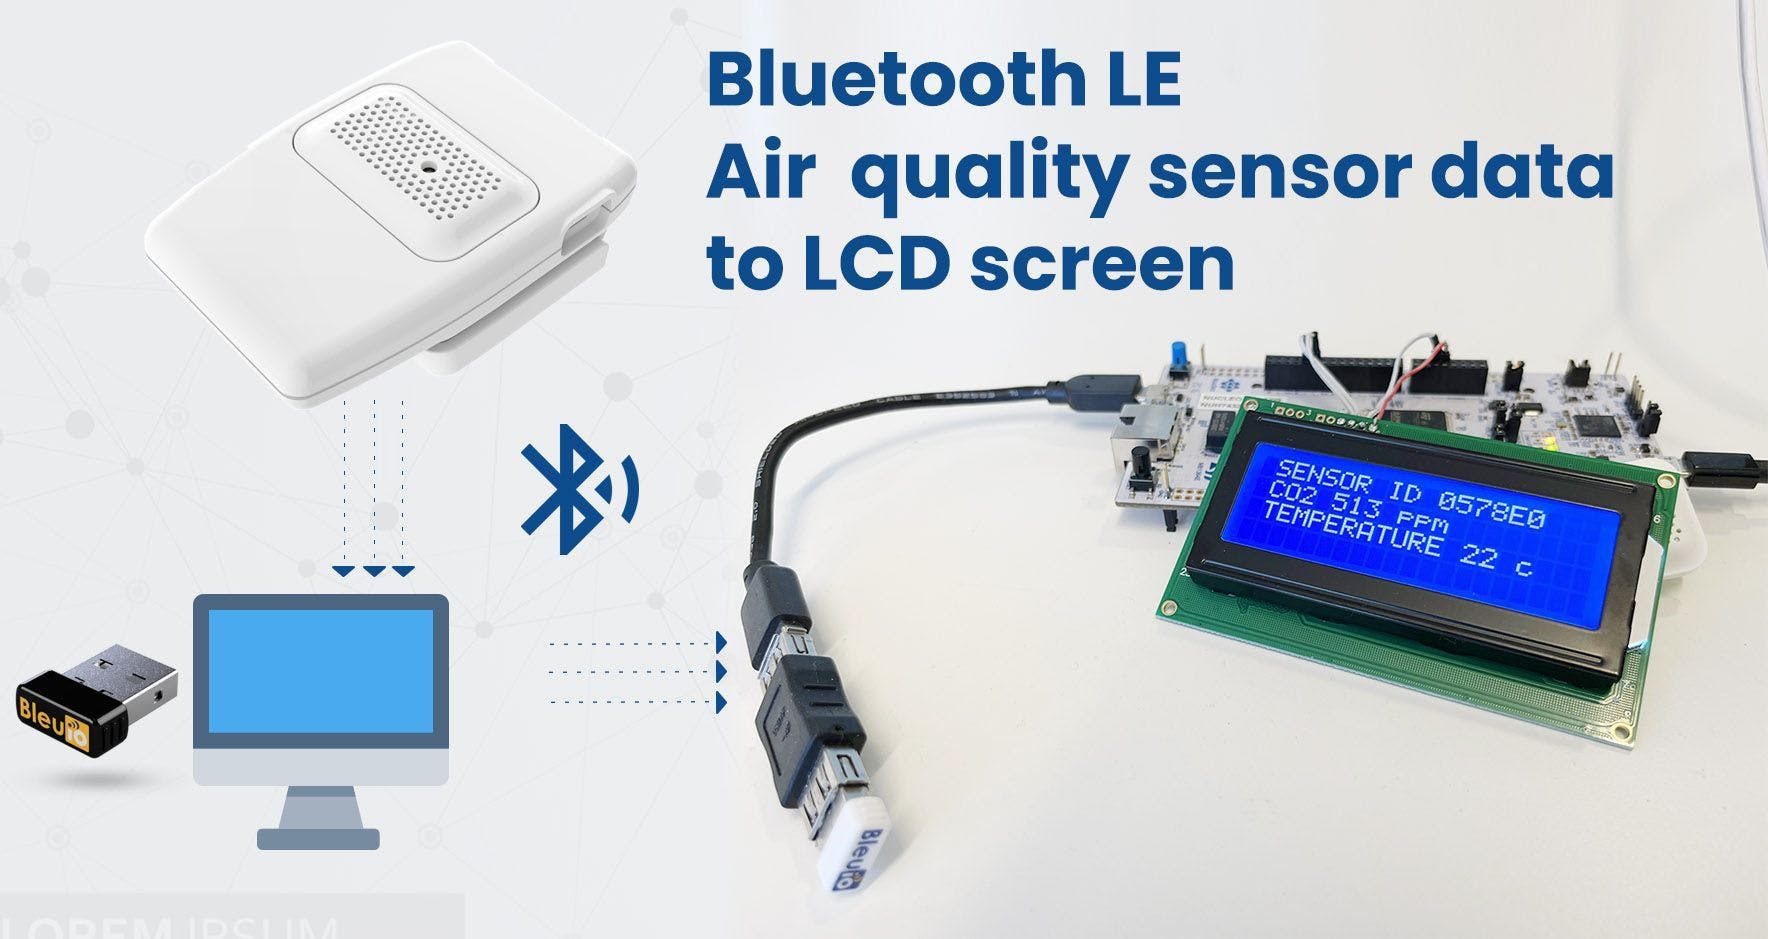 featured image - Show Bluetooth LE Sensor Readings on LCD Screen Connected to STM32 